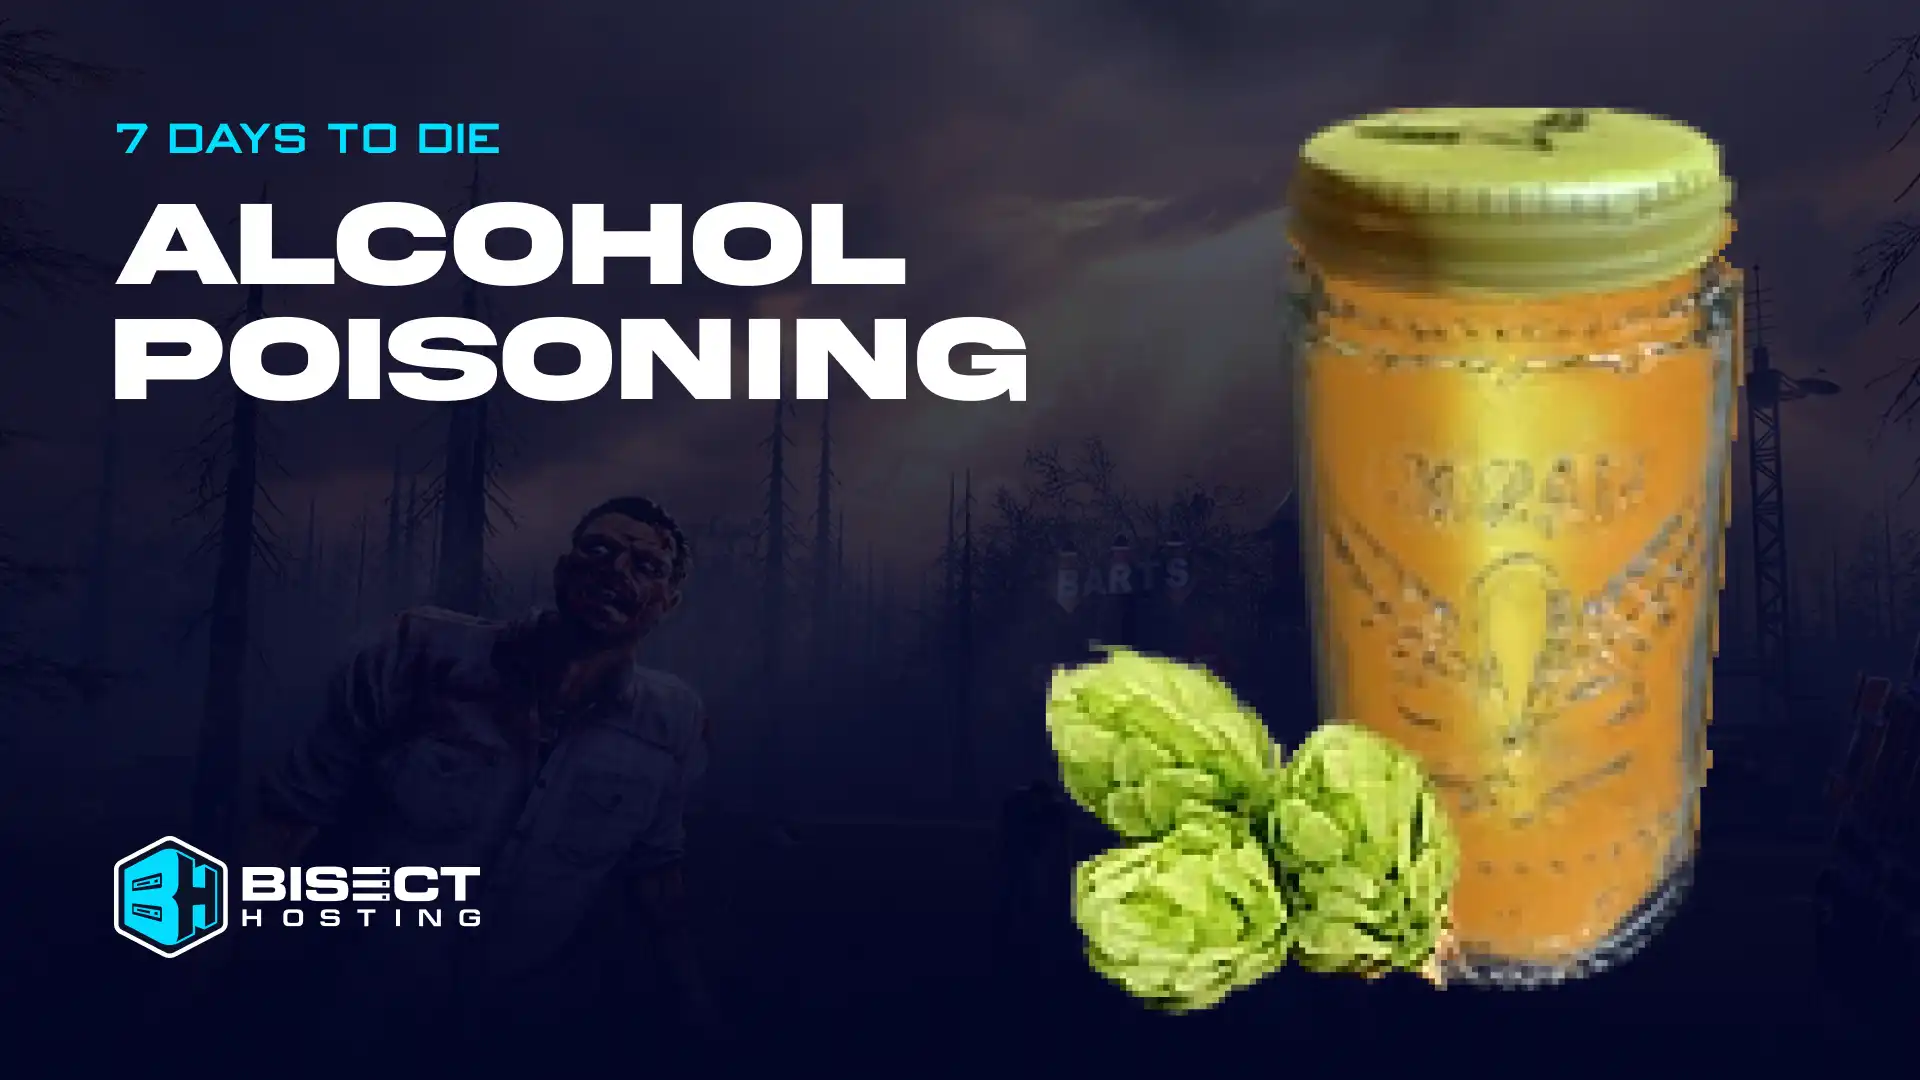 How Long Does Alcohol Poisoning Last in 7 Days To Die?